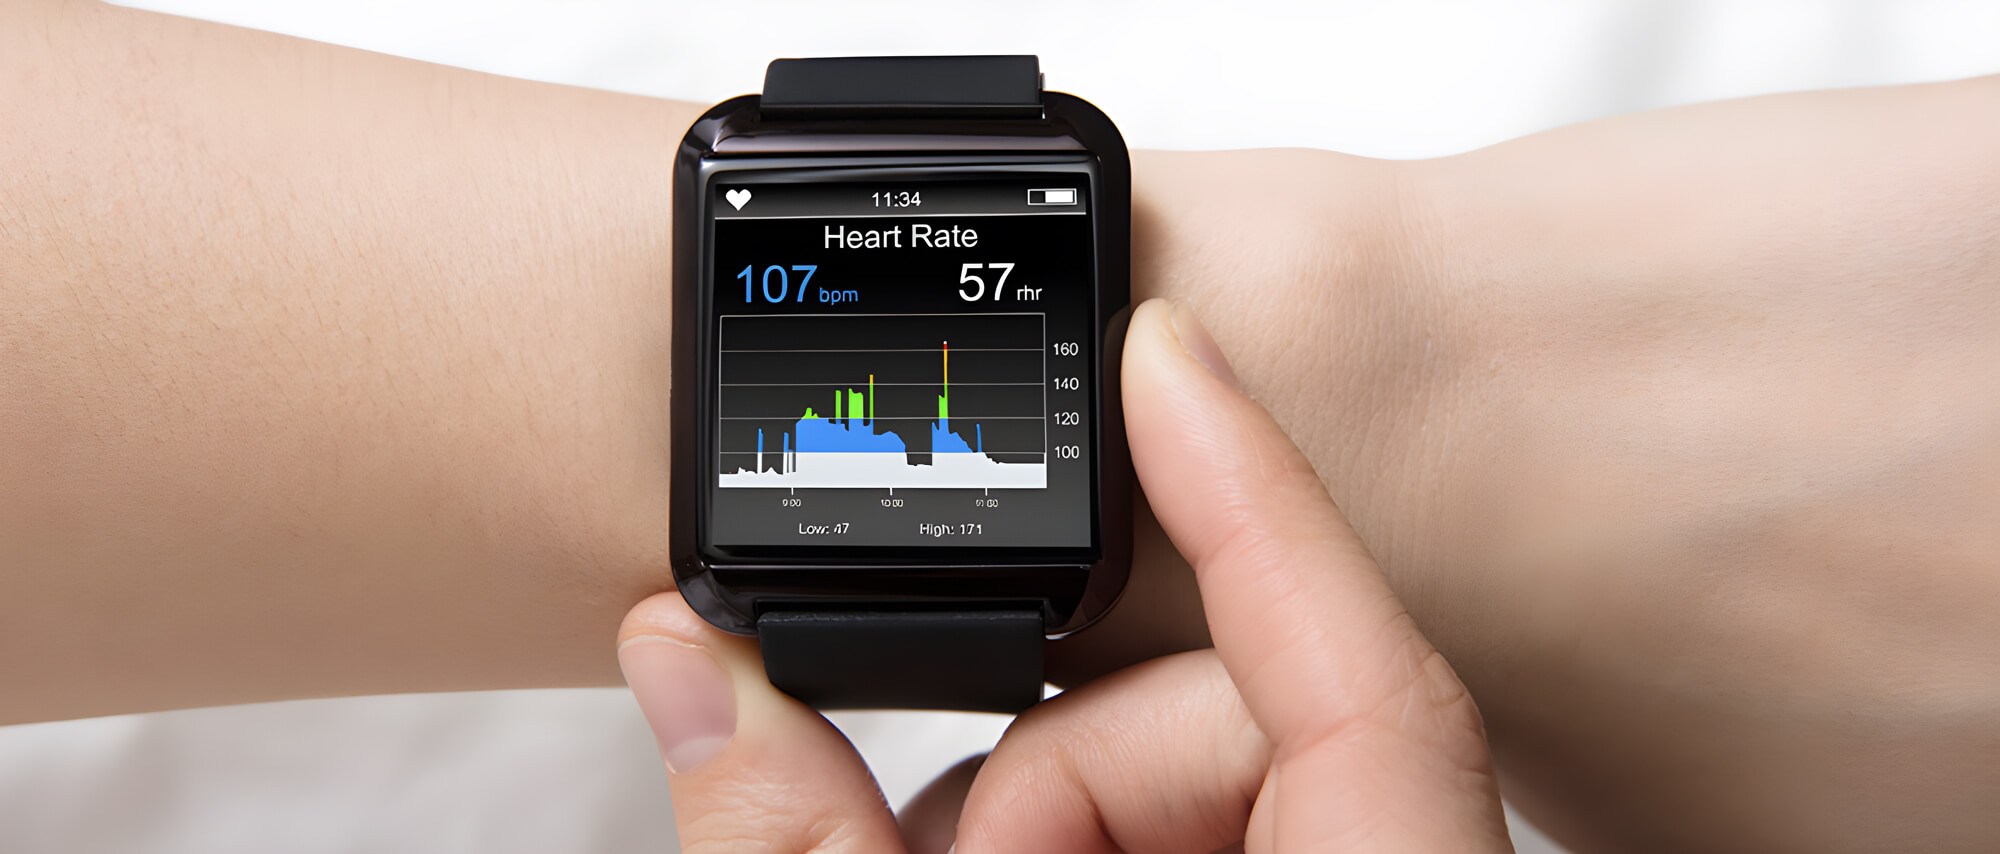 Tips for Getting the Most from a Heart Rate Monitor